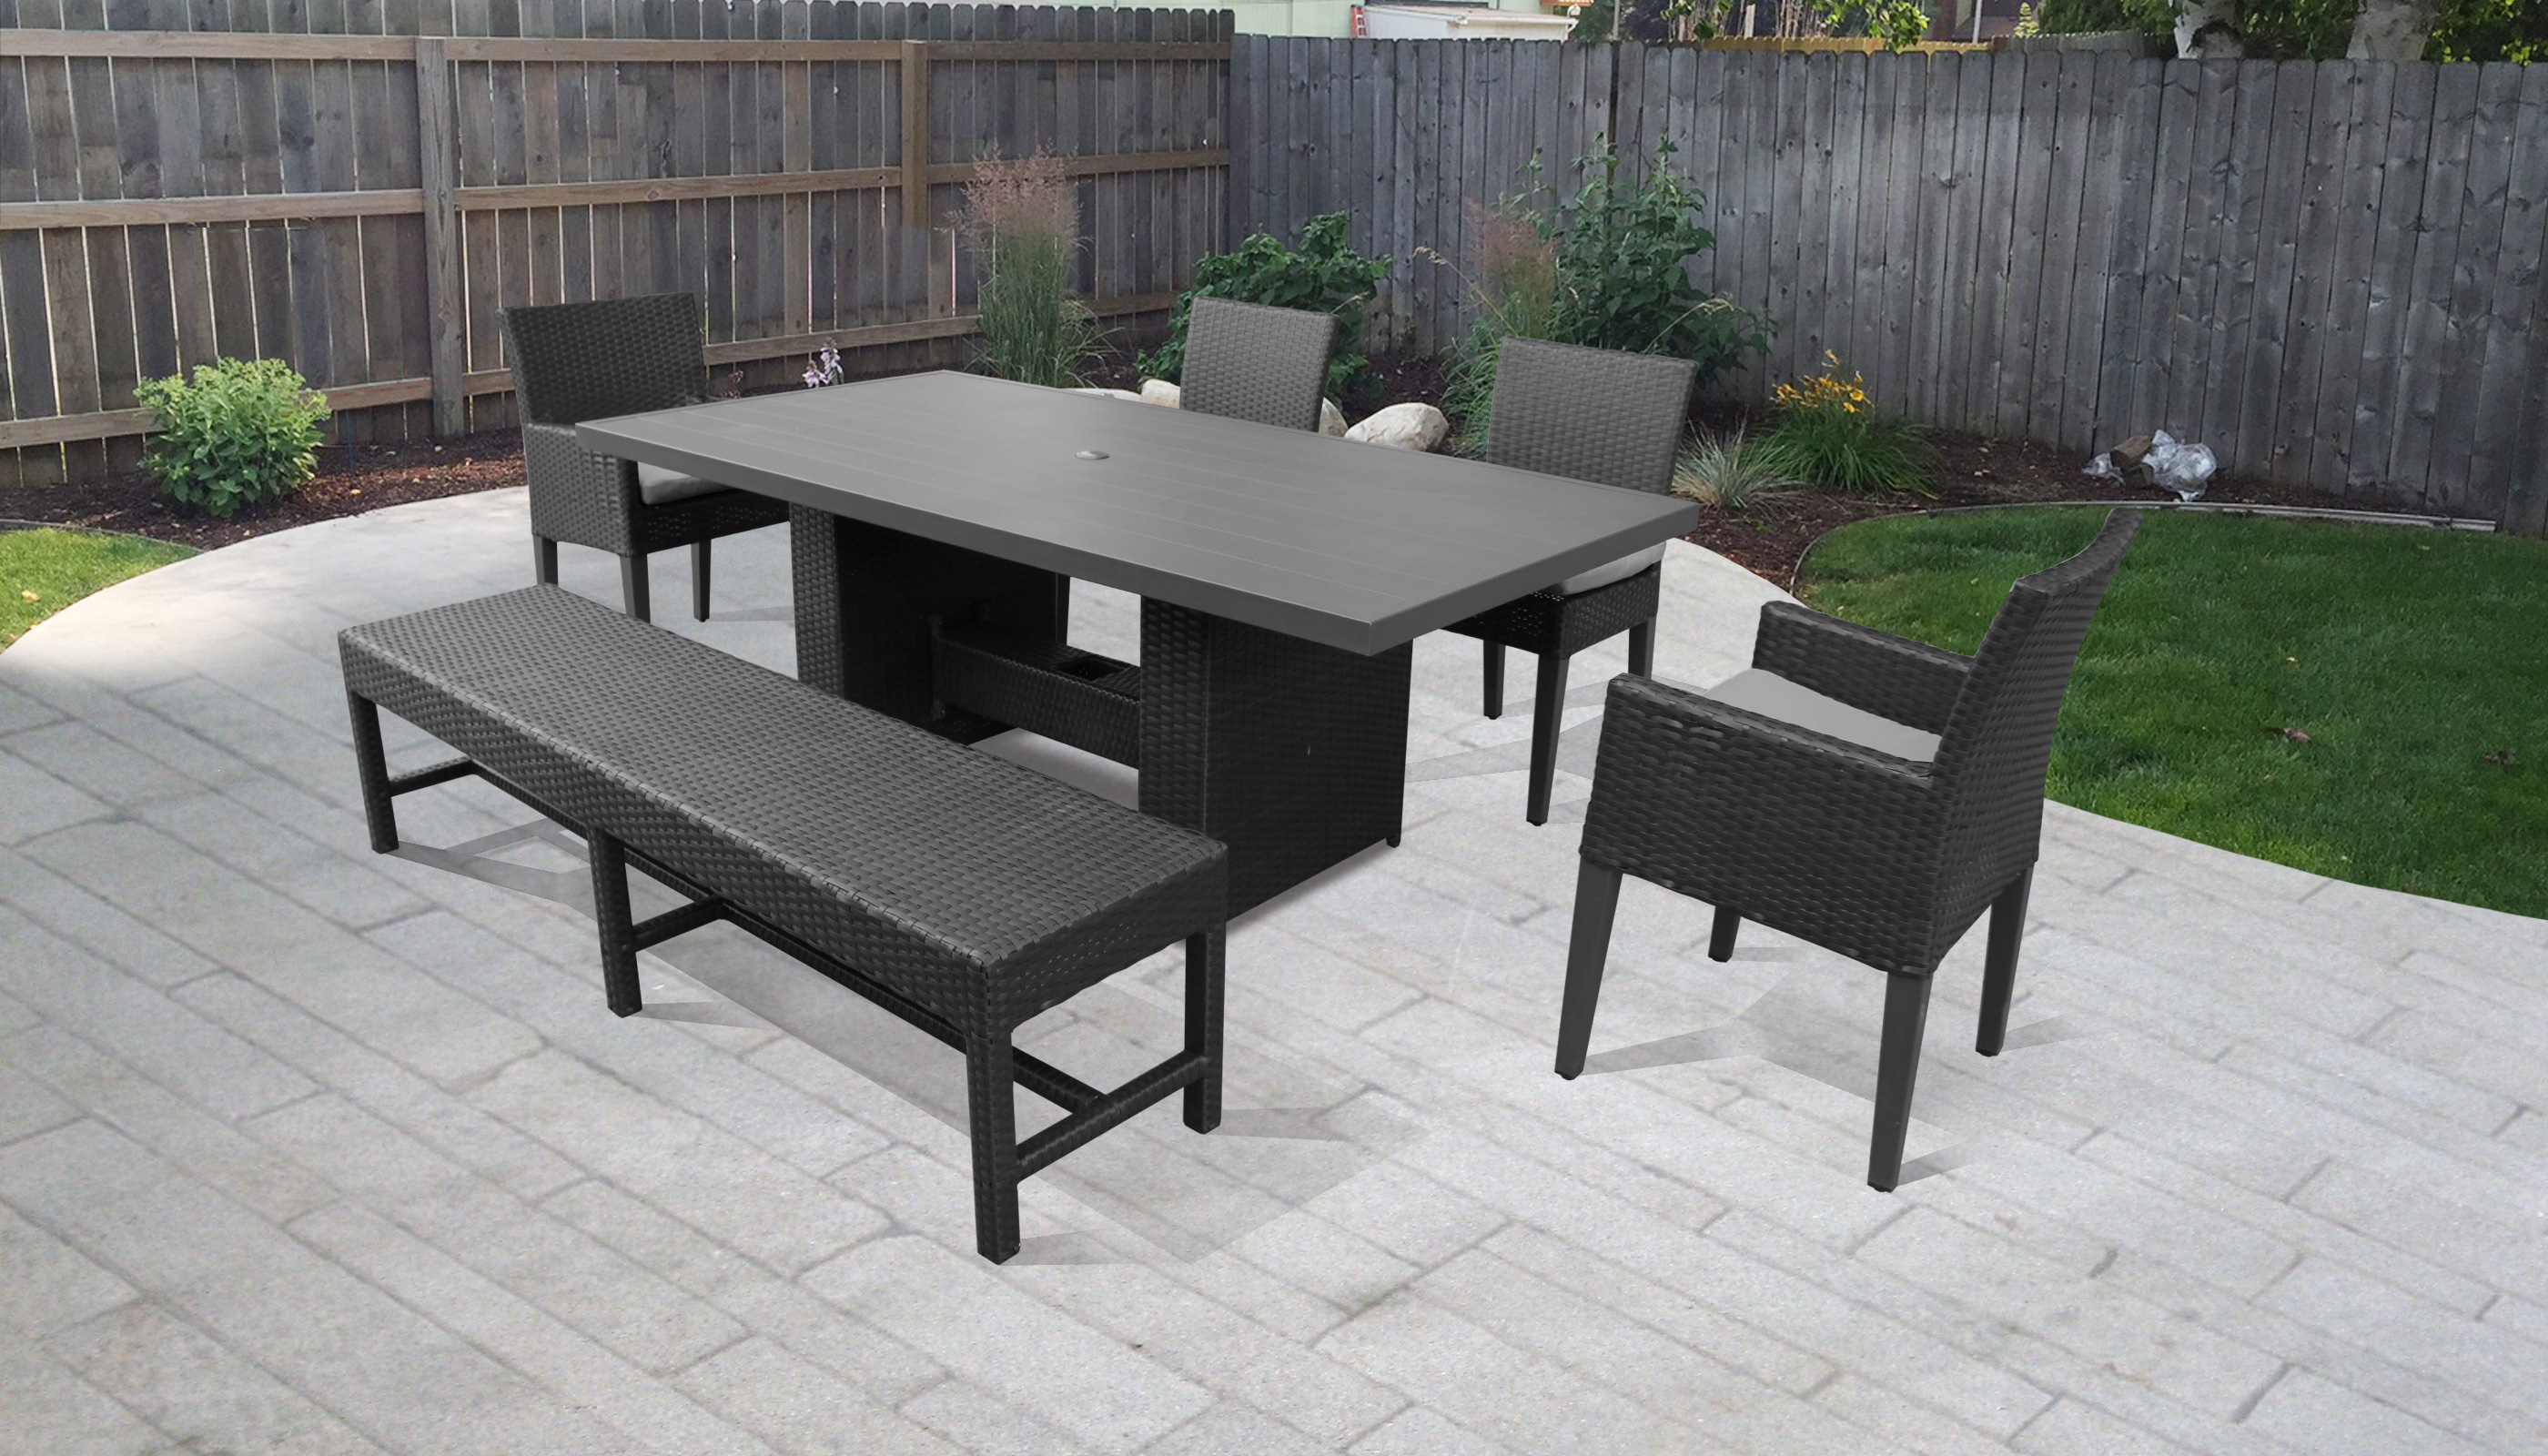 Belle Rectangular Outdoor Patio Dining Table With 4 Chairs and 1 Bench